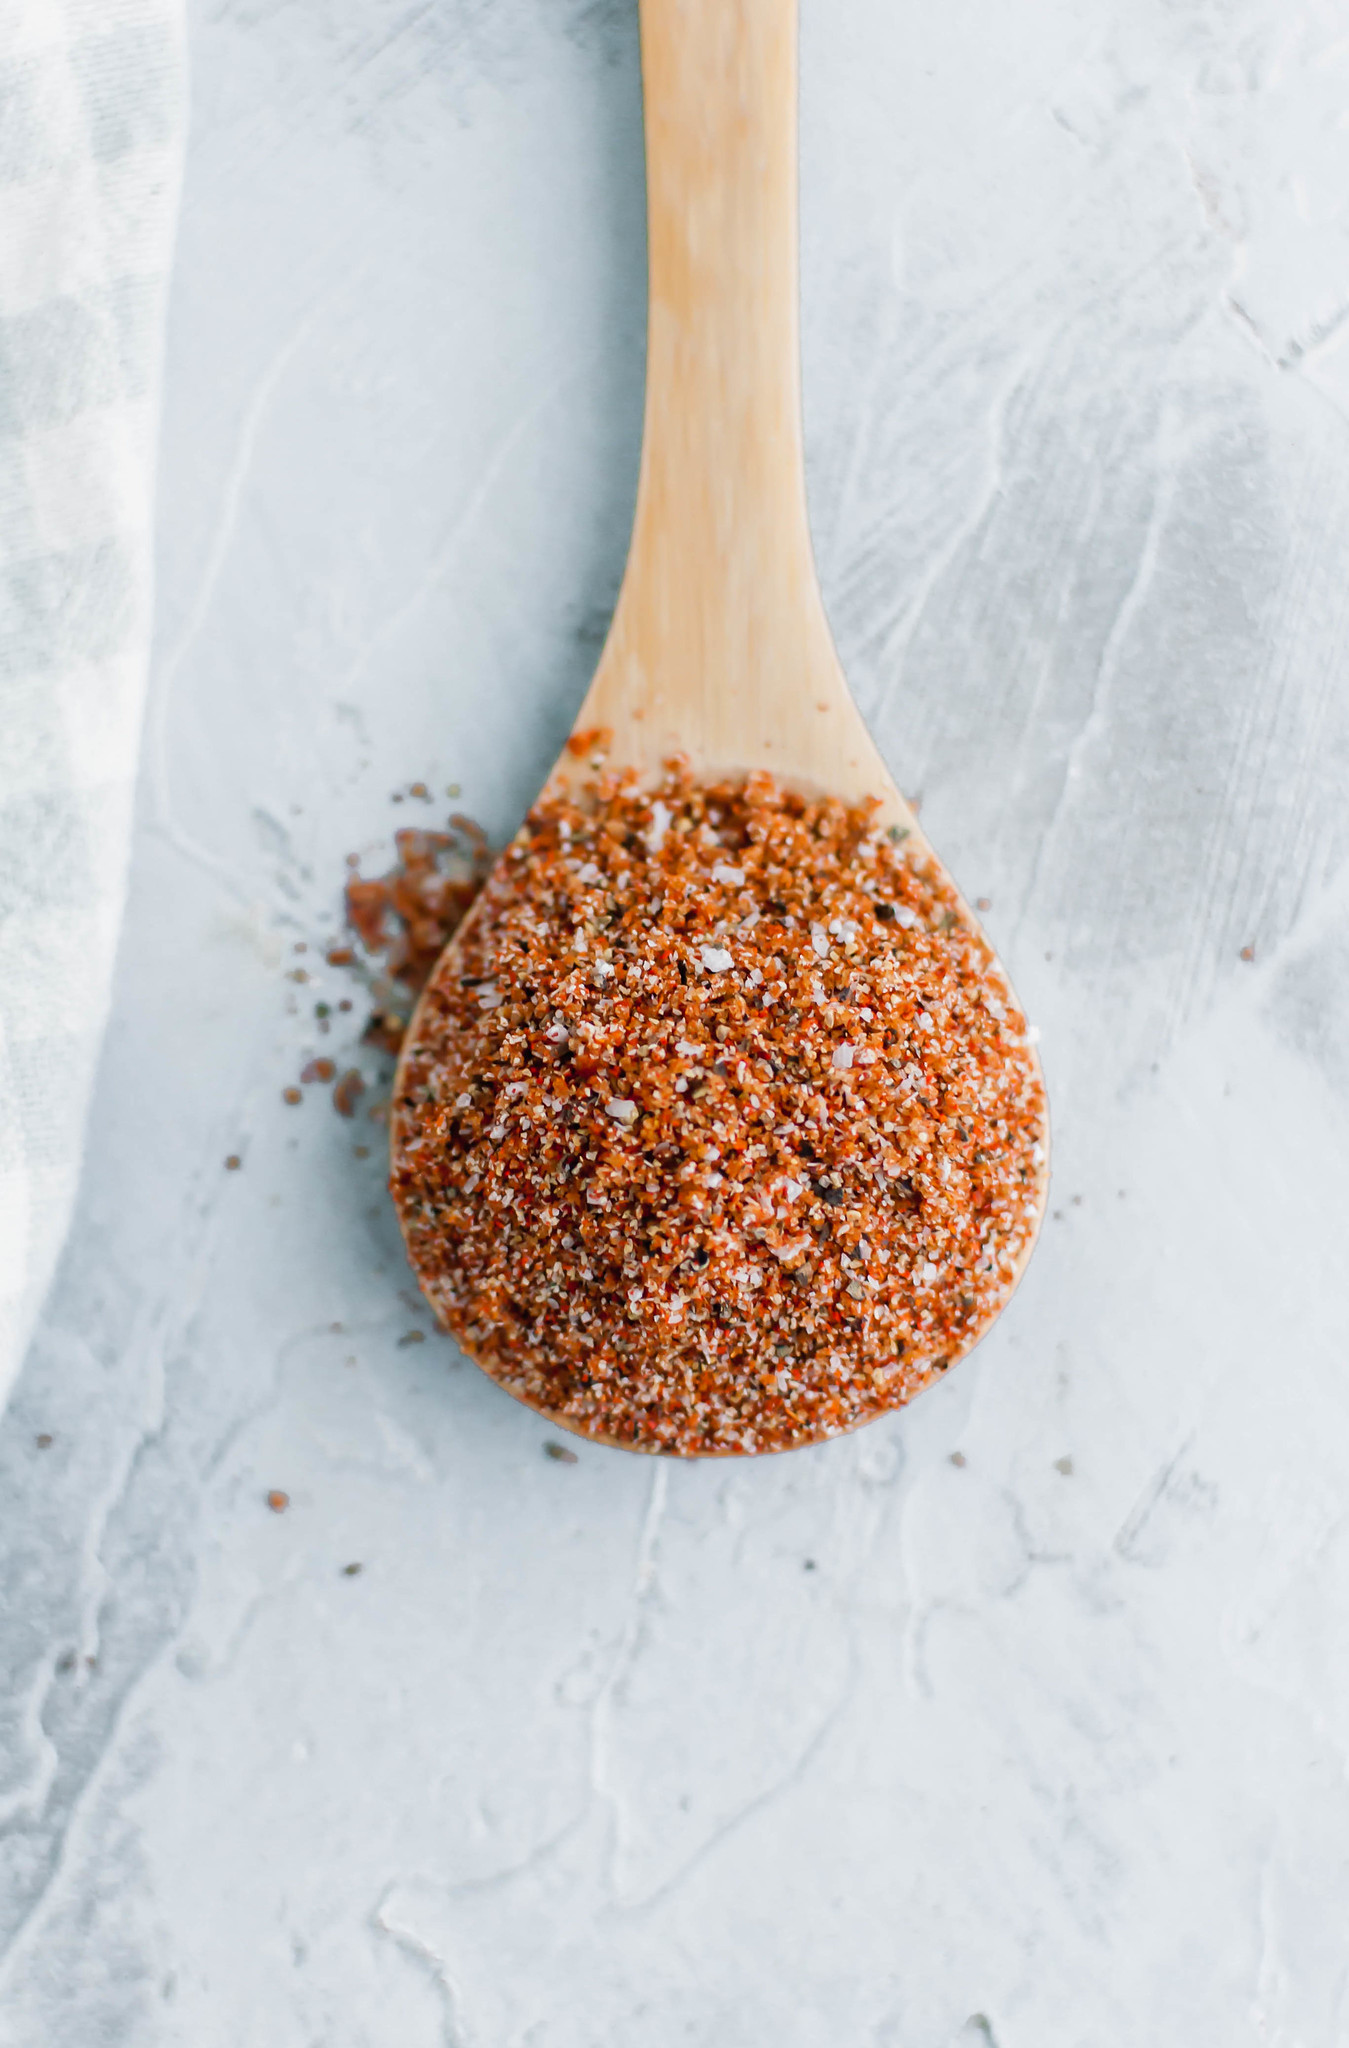 Keep a big batch of the Best BBQ Rub in your pantry for all your barbecuing this summer. All you need are pantry staples to whip up this sweet and spicy rub. A delicious combination of brown sugar and spices.